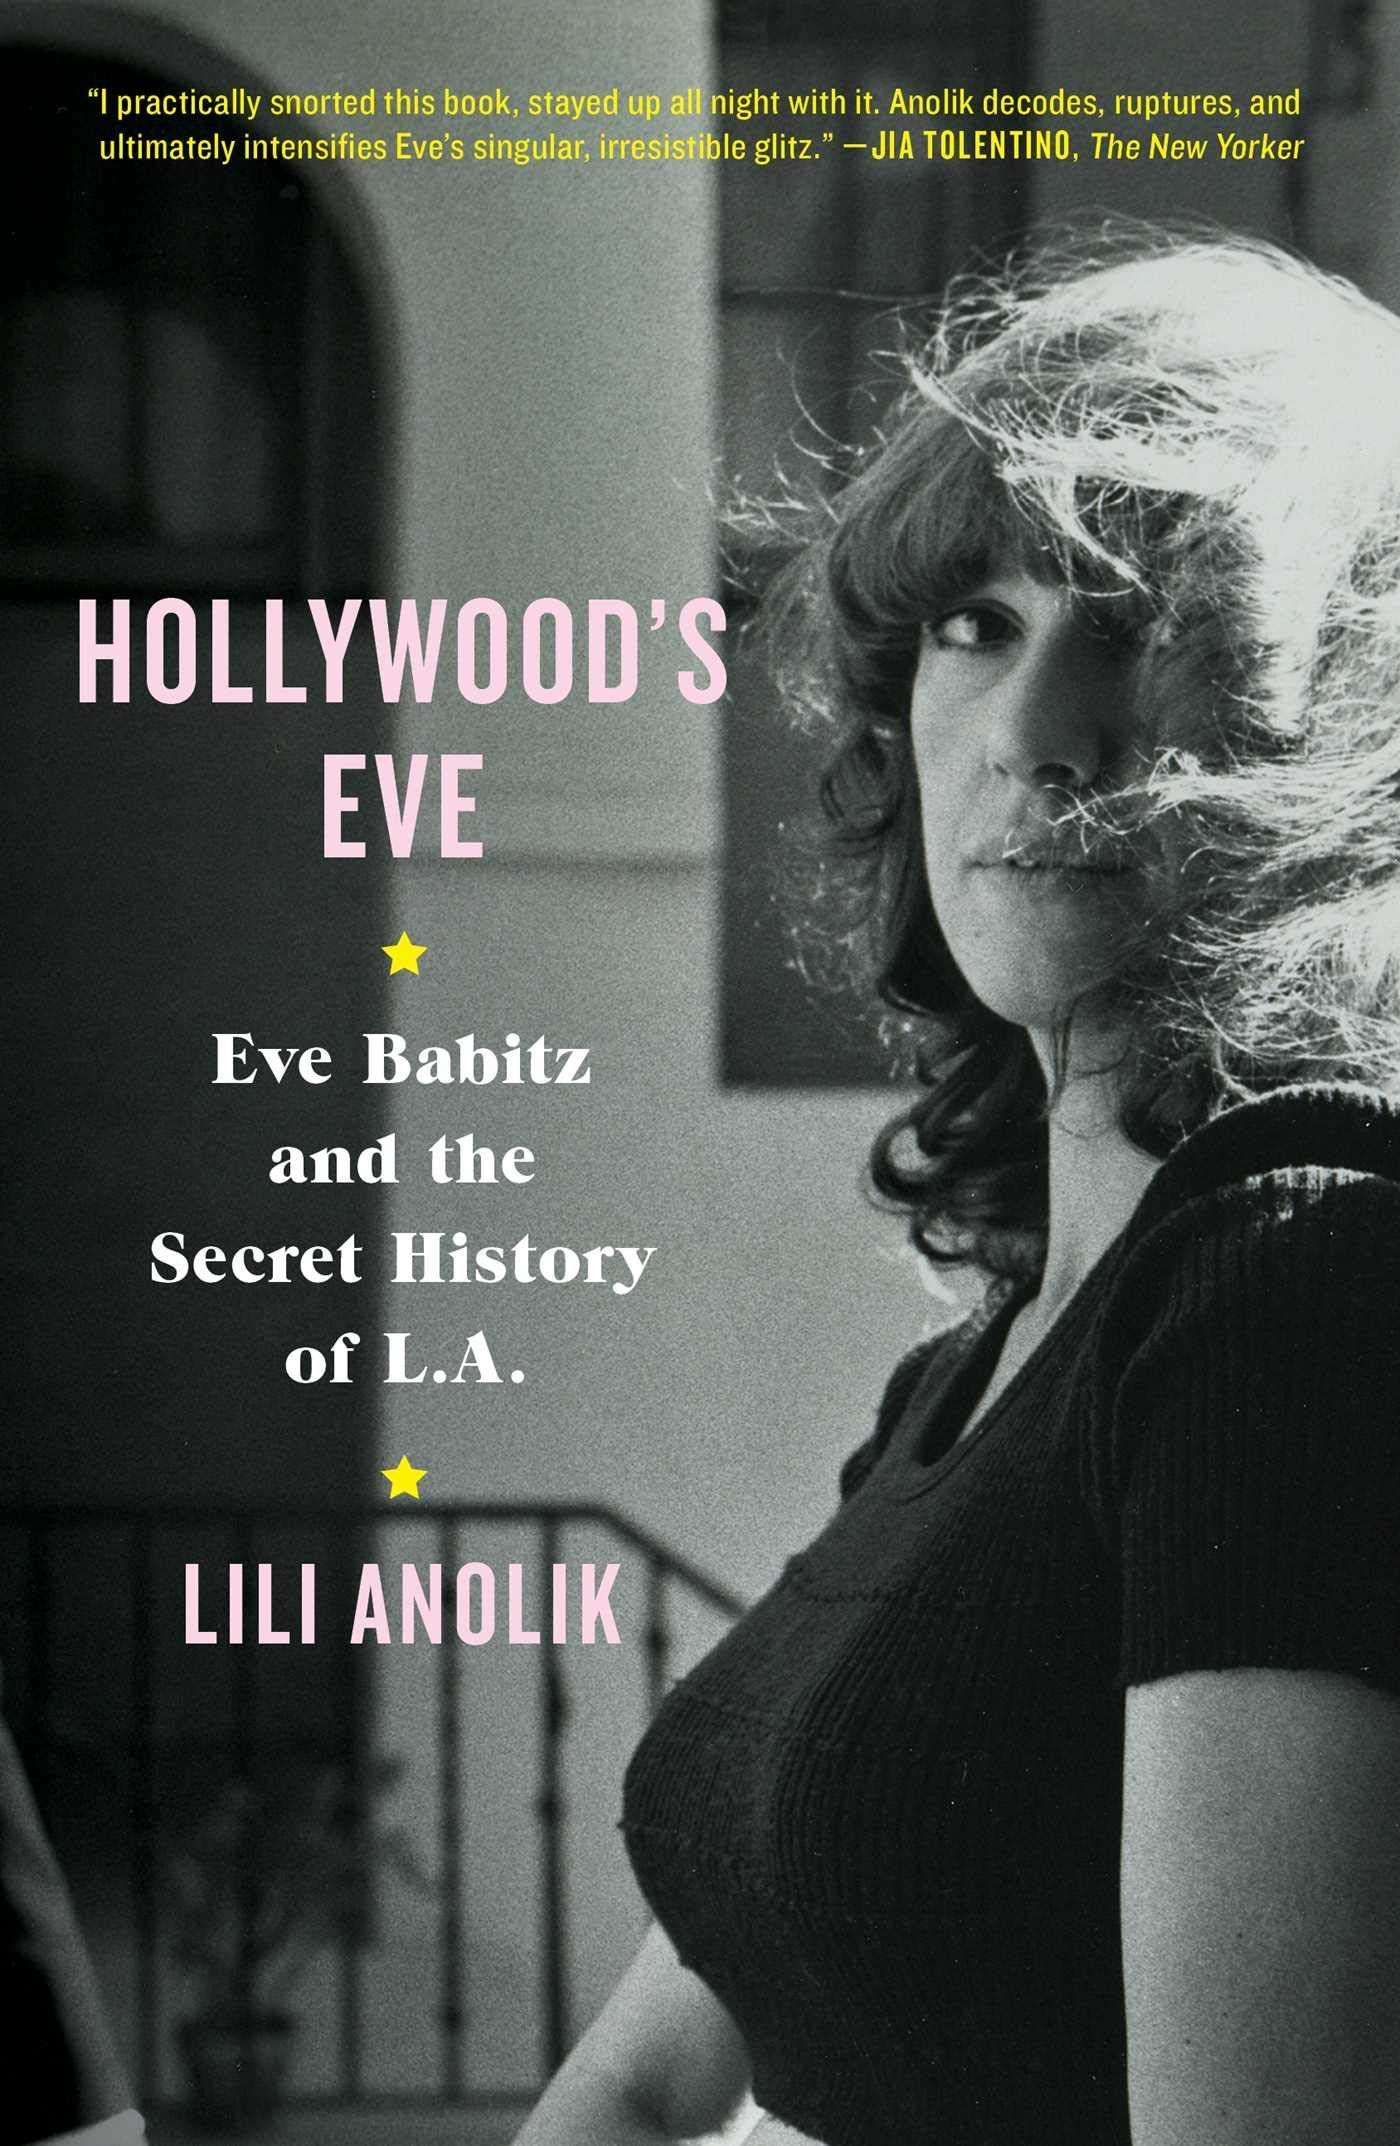 With Love and Squalor: On Lili Anolik’s “Hollywood’s Eve: Eve Babitz and the Secret History of L.A.”